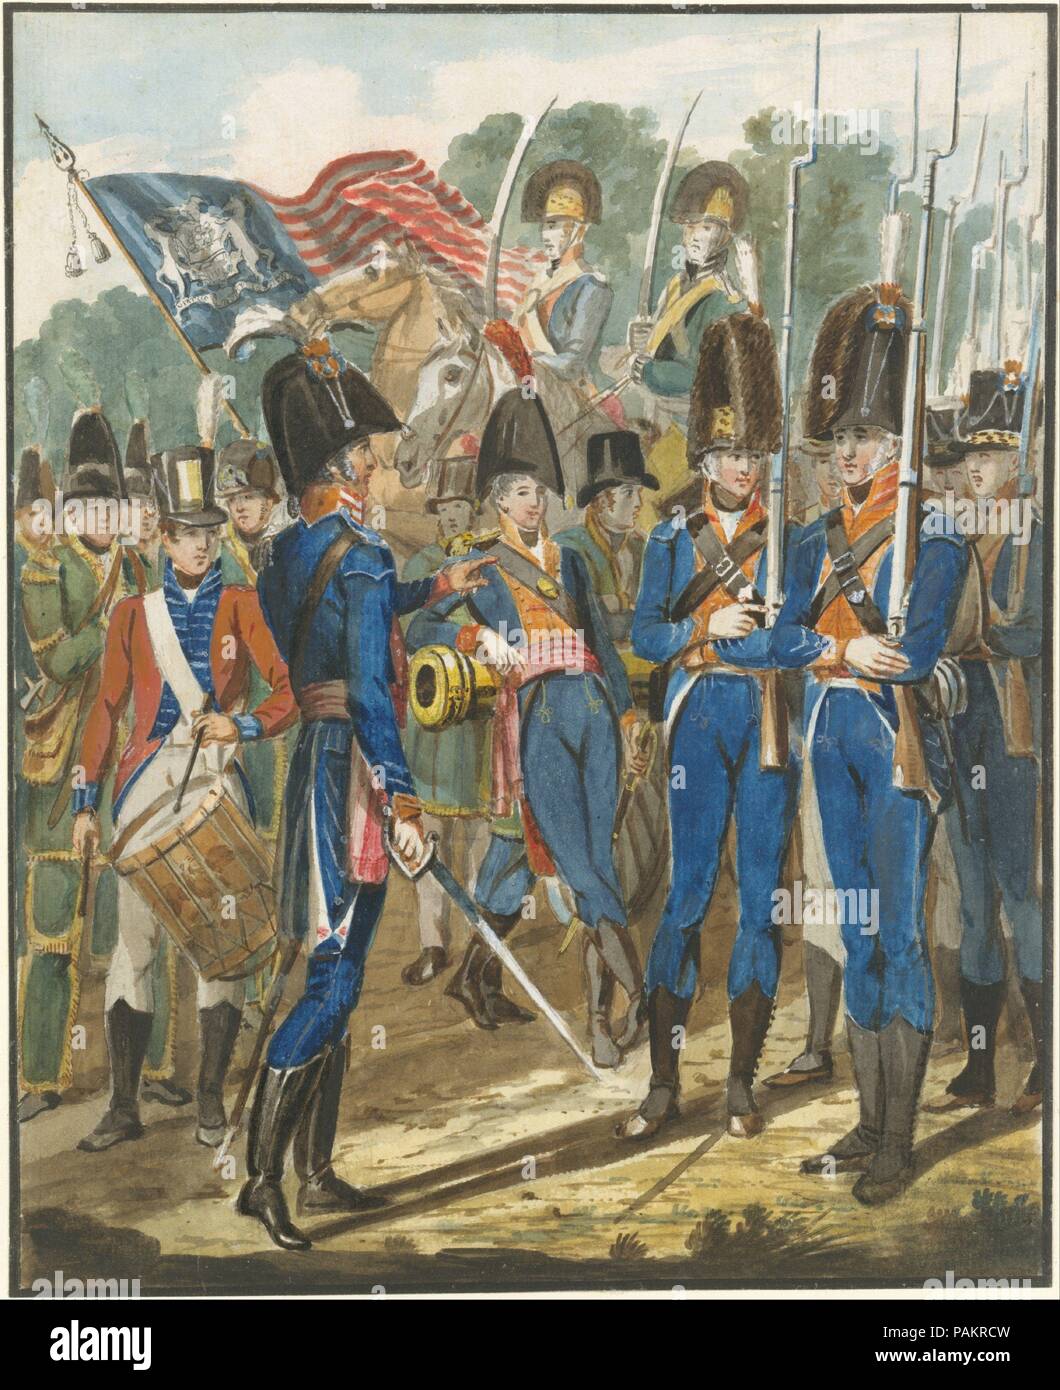 Members of the City Troop and Other Philadelphia Soldiery. Artist: John Lewis Krimmel (1786-1821). Dimensions: 9 x 7 1/4 in. (22.9 x 18.4 cm). Former Attribution: Formerly attributed to Pavel Petrovich Svinin (1787/88-1839). Date: 1811-ca. 1813.  The oldest active volunteer mounted military unit in the United States, the First Troop Philadelphia City Cavalry was organized in 1774 in defense of the colonies. Shortly after commencement of war with Great Britain in the summer of 1812, the troop drilled several times a month for over a year; such an assembly may have provided the stimulus for this Stock Photo